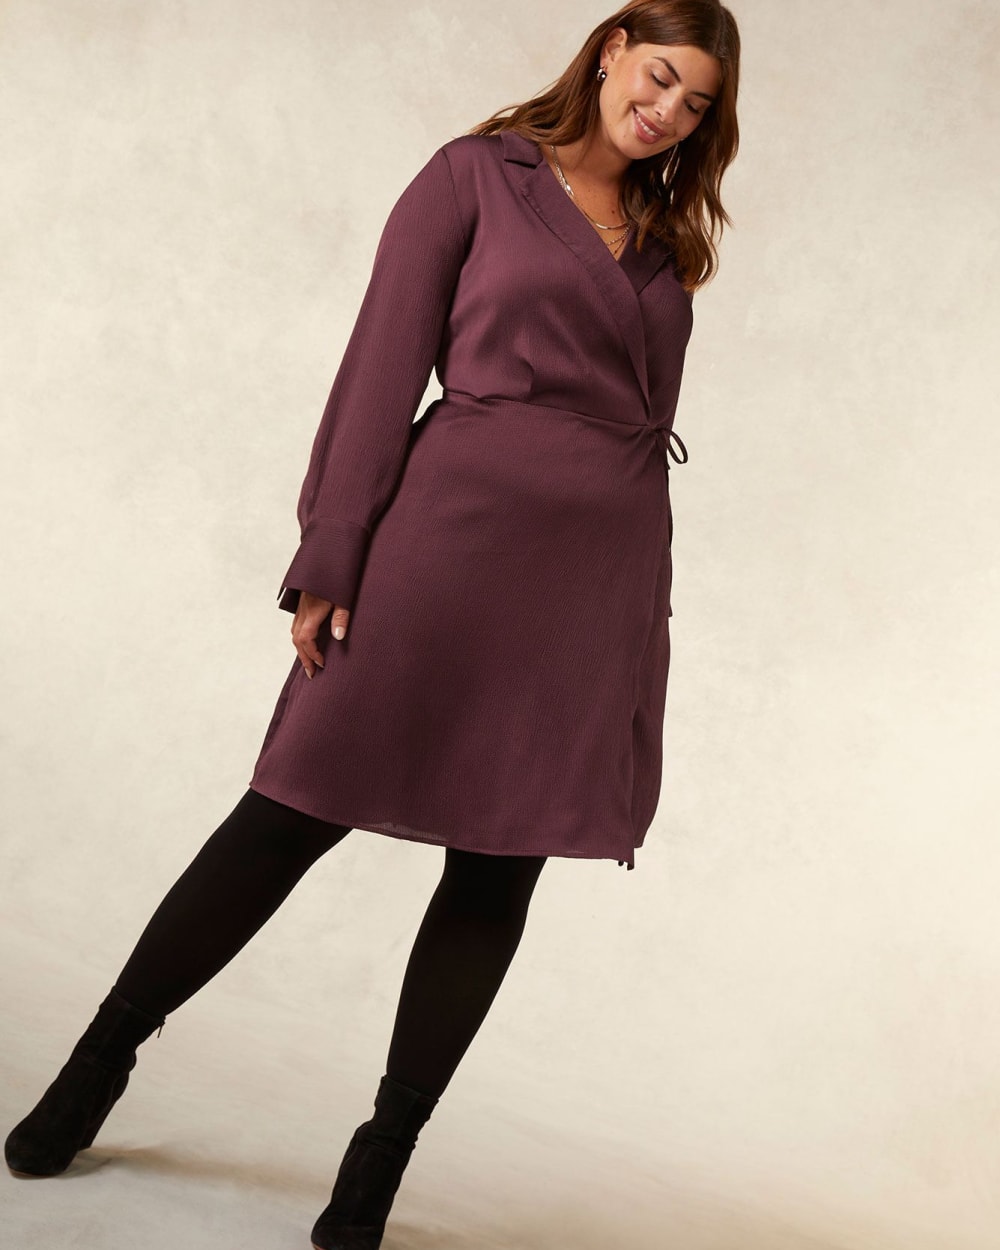 Satin Wrap Dress with Long Sleeves - Addition Elle